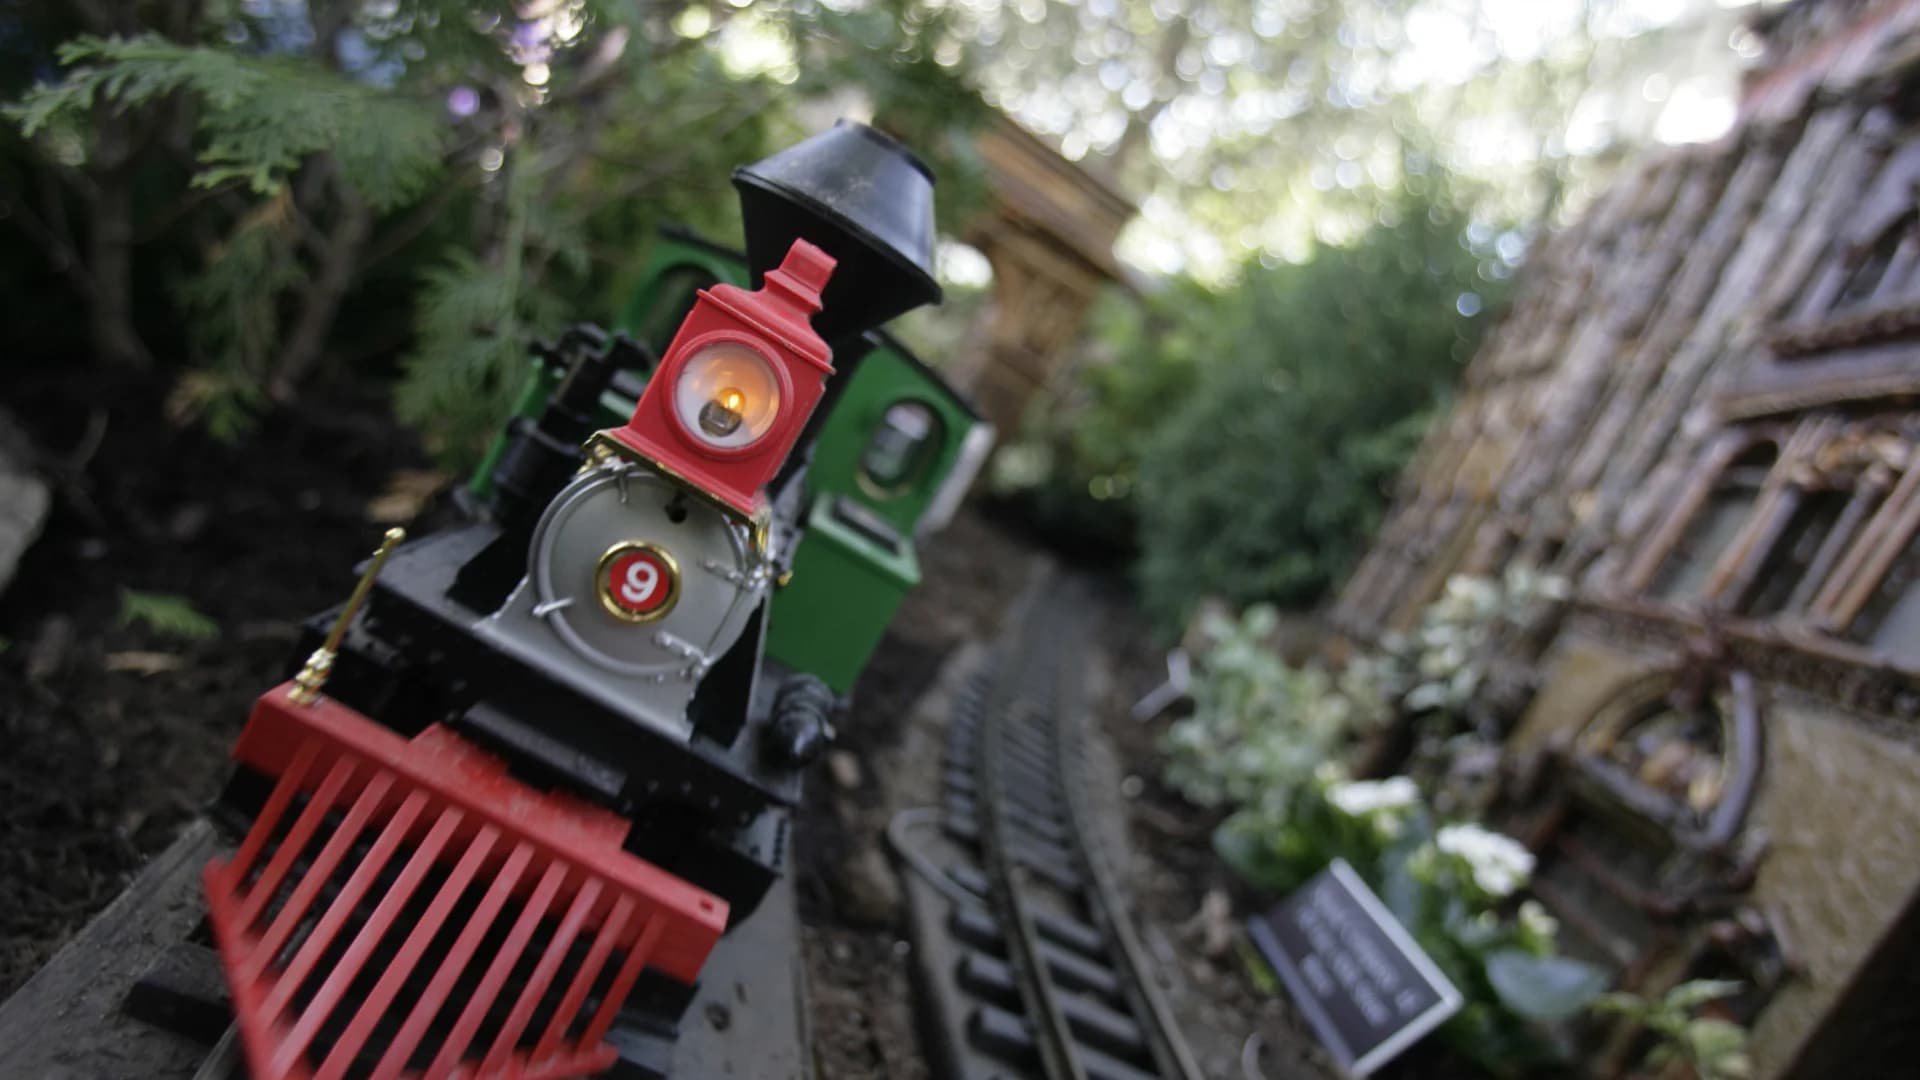 These 2 videos will bring the magic of the NYBG Holiday Train Show to your home